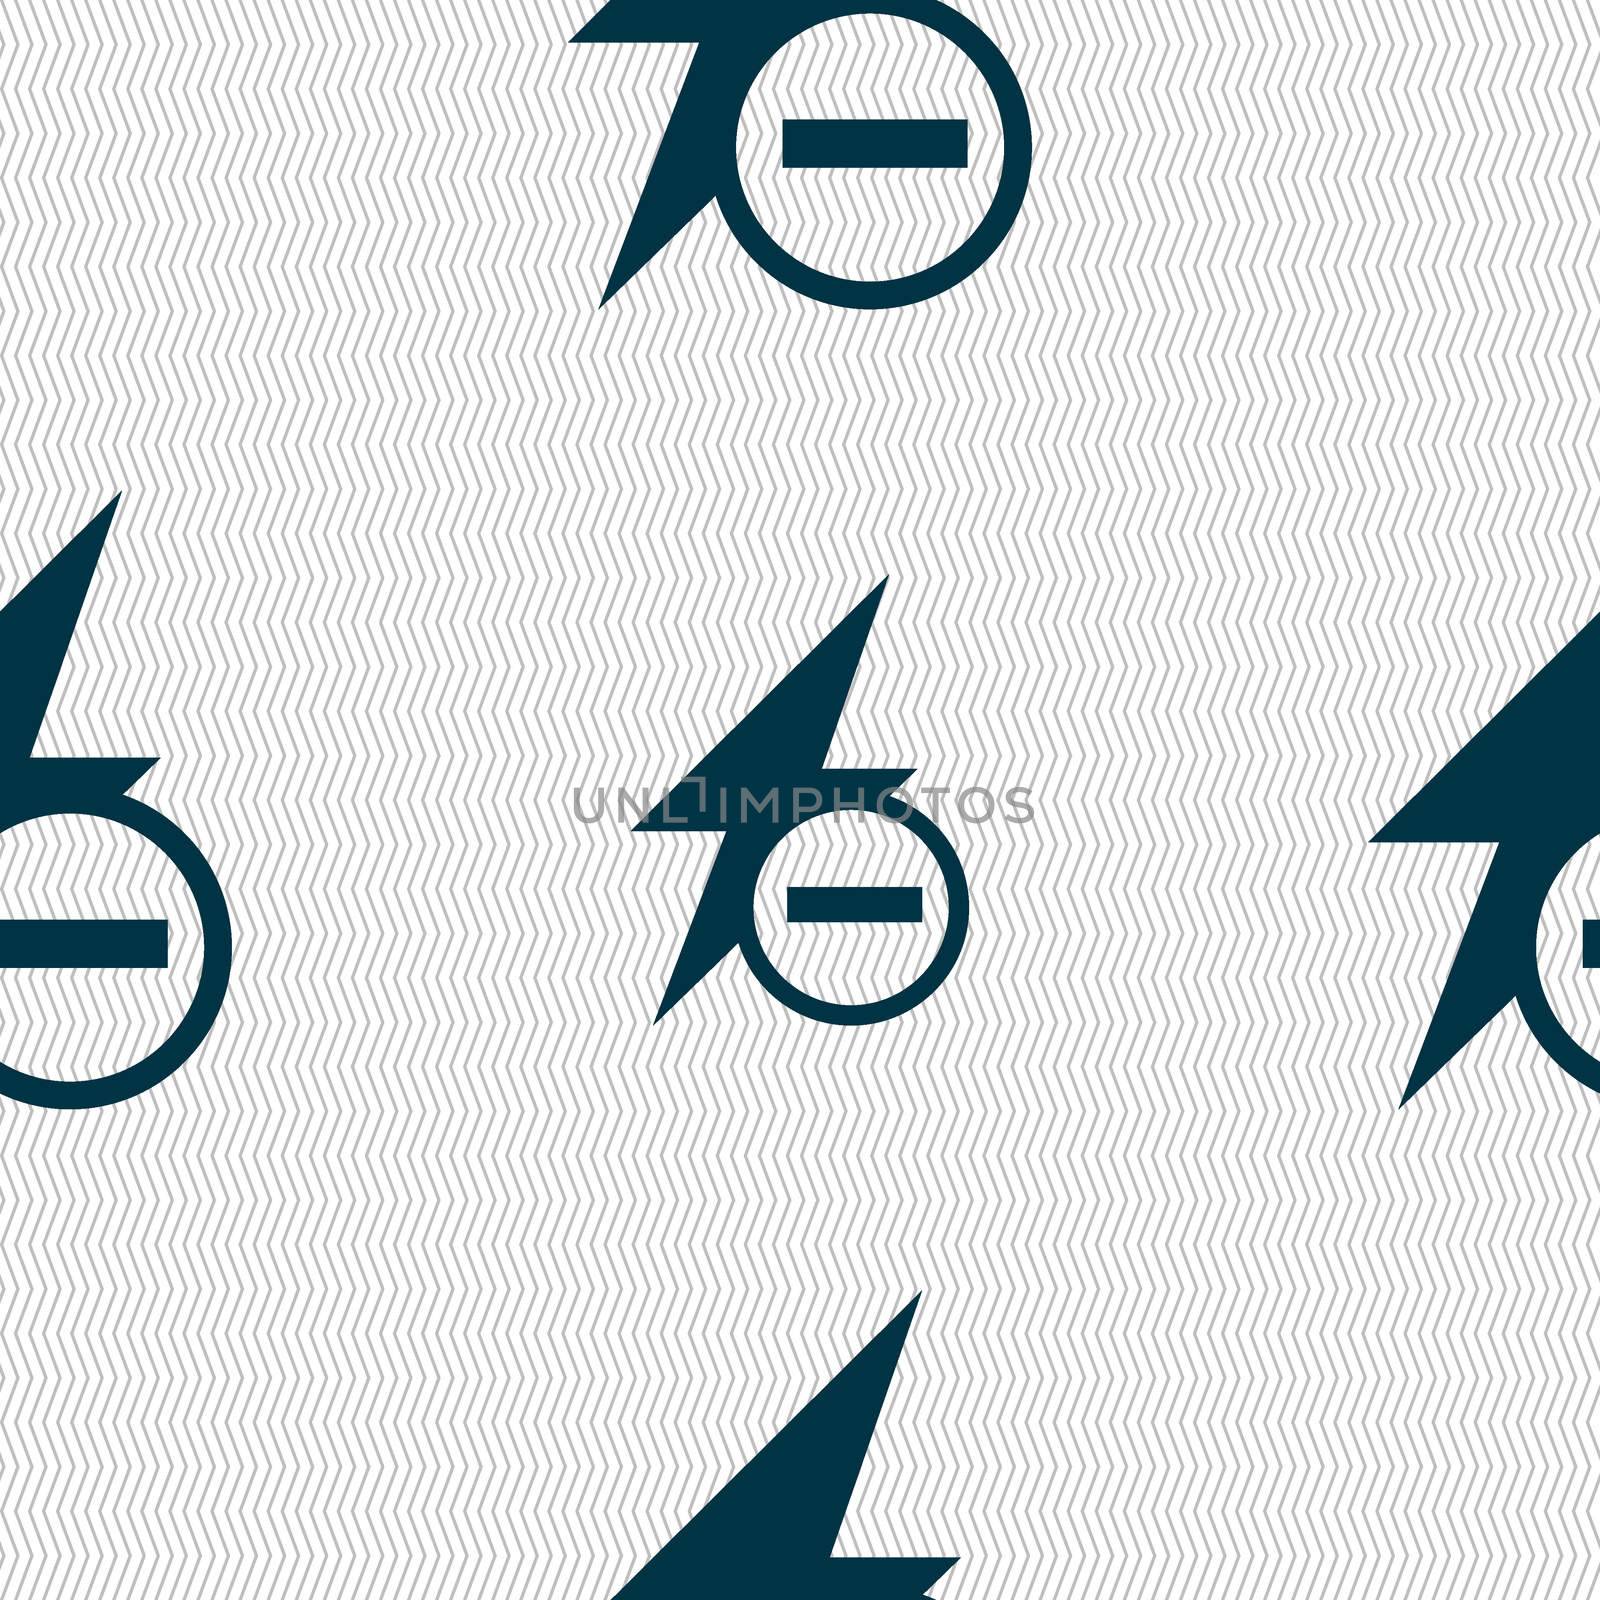 Photo flash icon sign. Seamless abstract background with geometric shapes.  by serhii_lohvyniuk